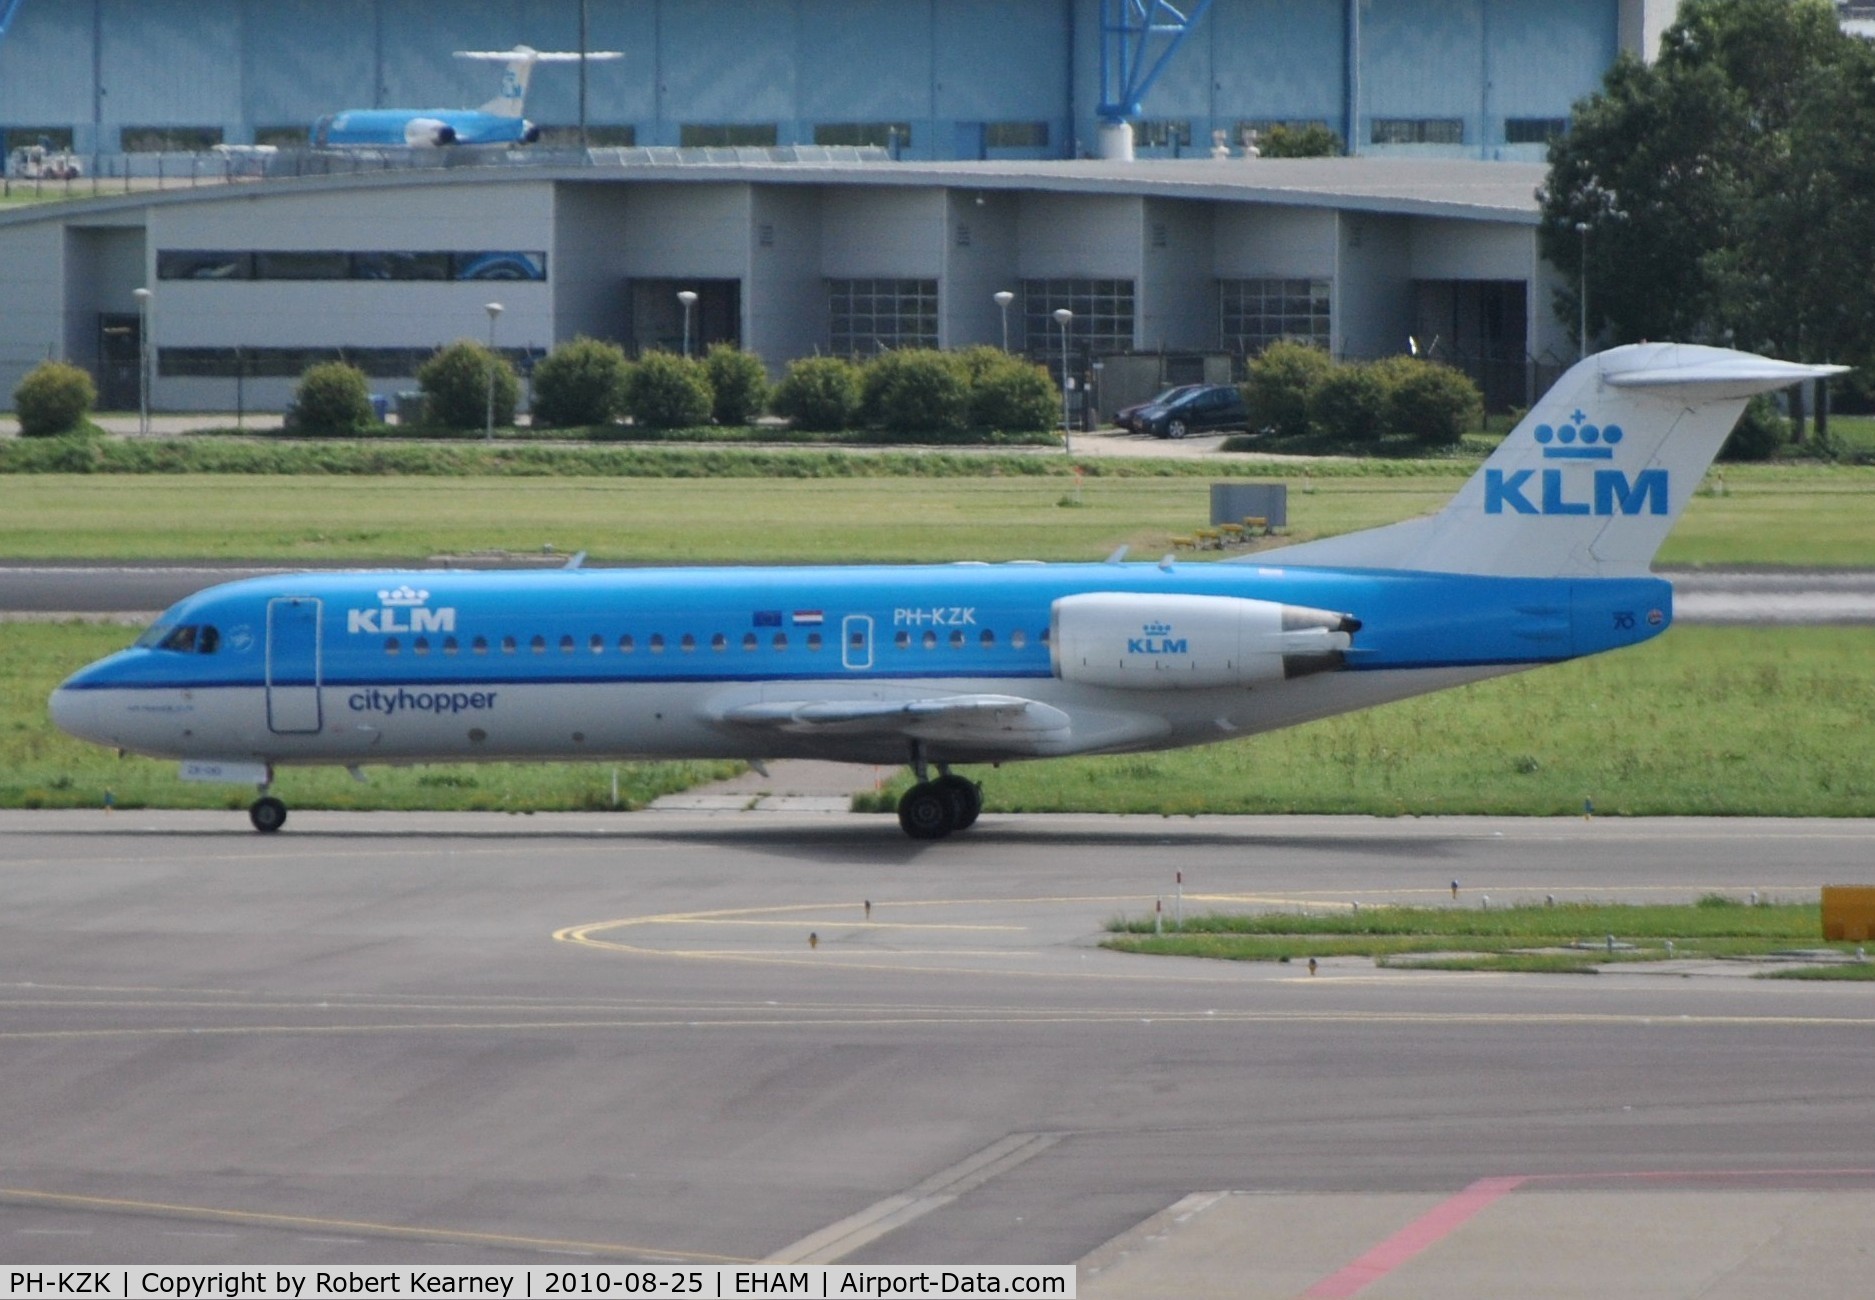 PH-KZK, 1997 Fokker 70 (F-28-0070) C/N 11581, And another KLM cityhopper taxiing for take off